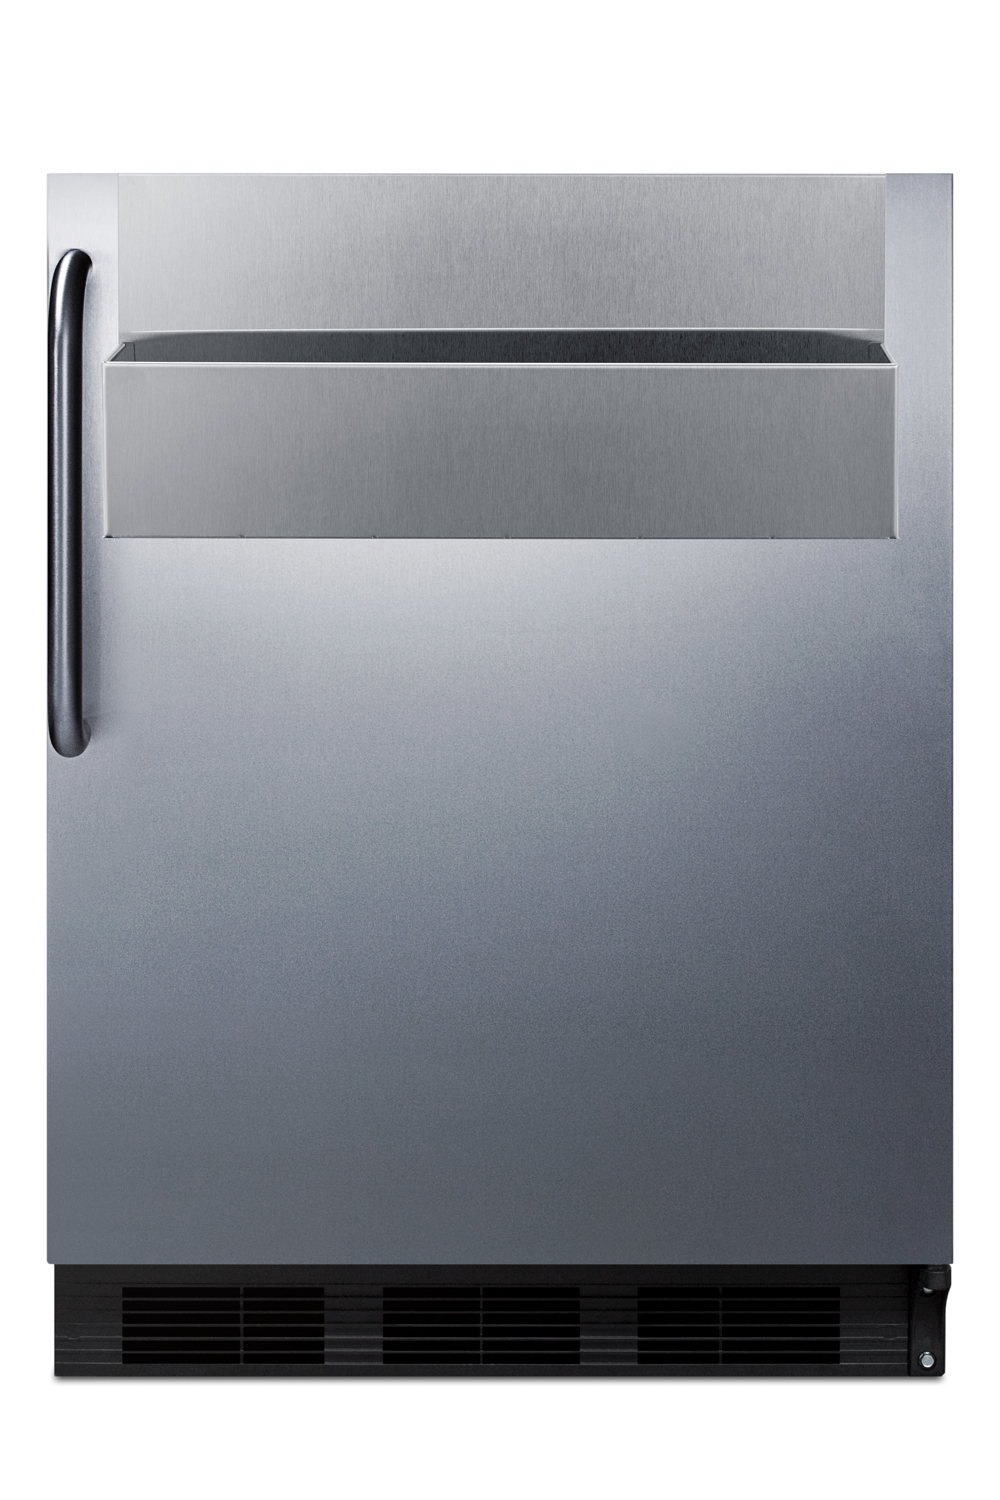 Summit 24" Wide Built-In All-Refrigerator, ADA Compliant, with Speed Rail